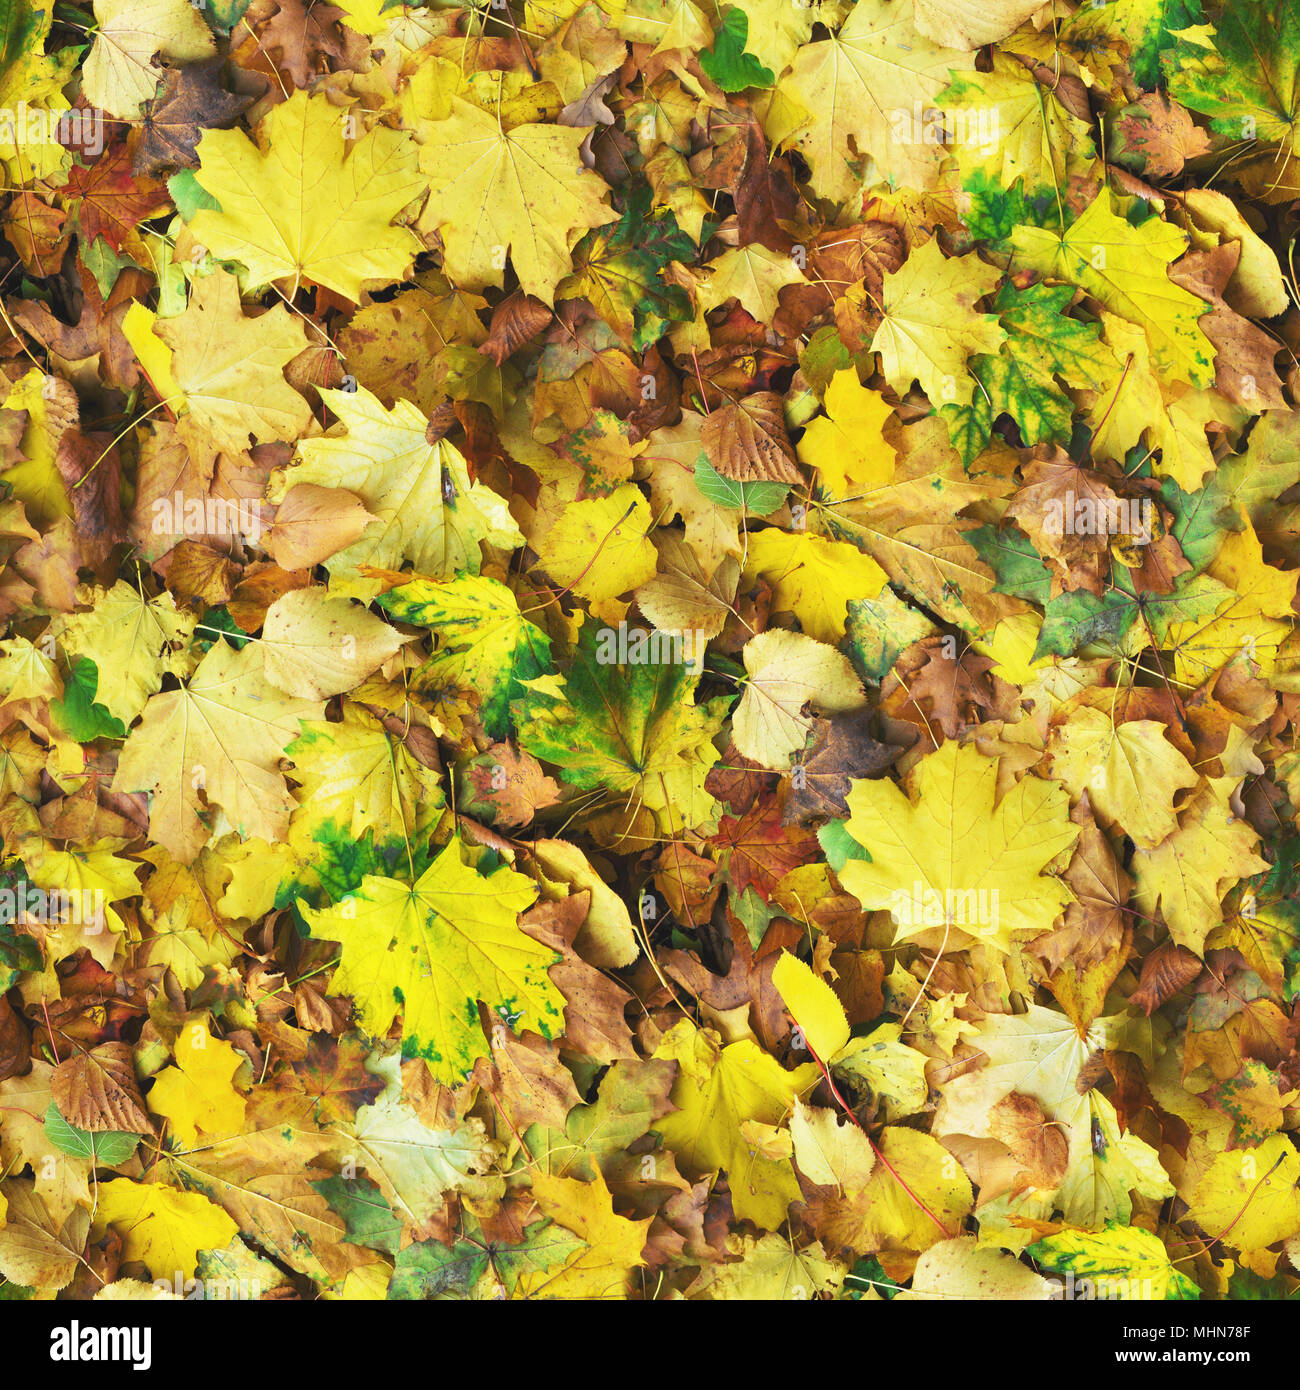 Autumn seamless pattern background. Maple and birch colorful fallen leaves on the park ground at sunny day. Stock Photo